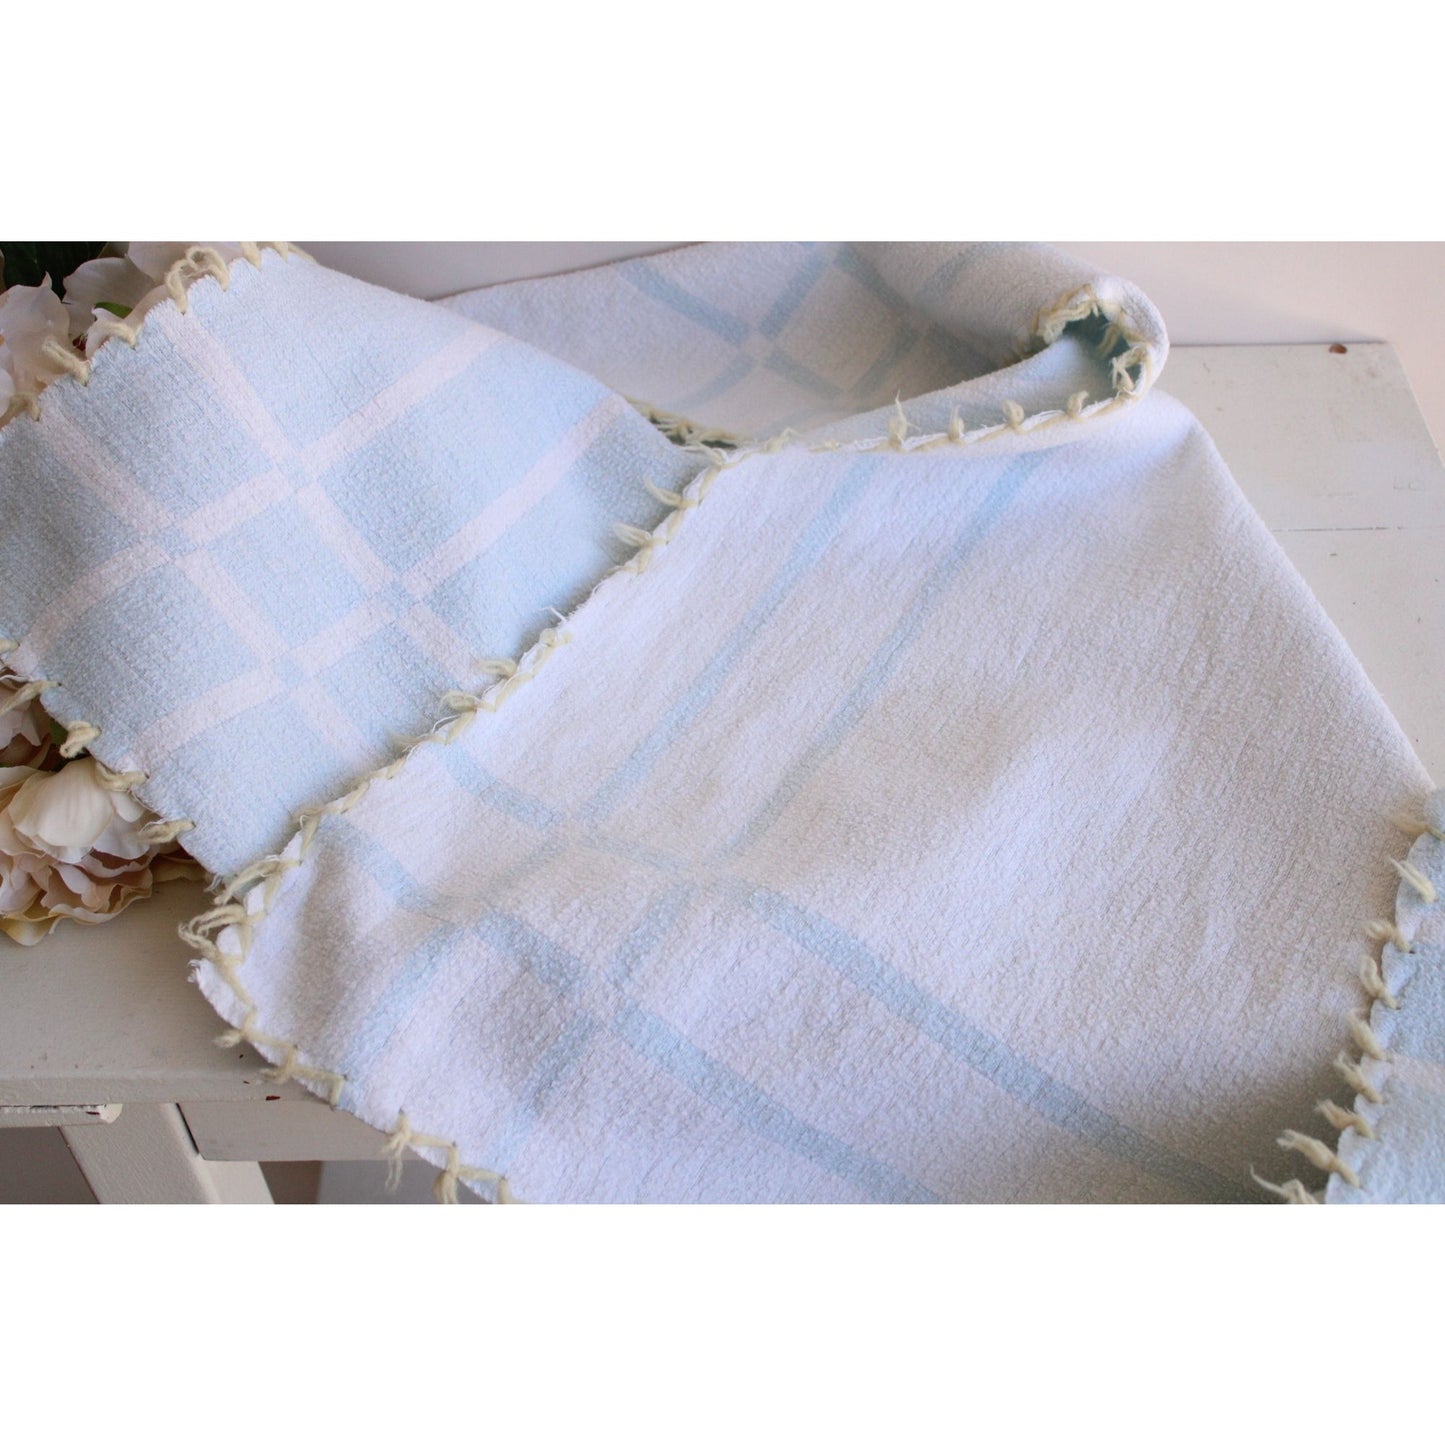 Vintage 1930s 1940s Baby Blanket Or Throw by Baby Pepperell